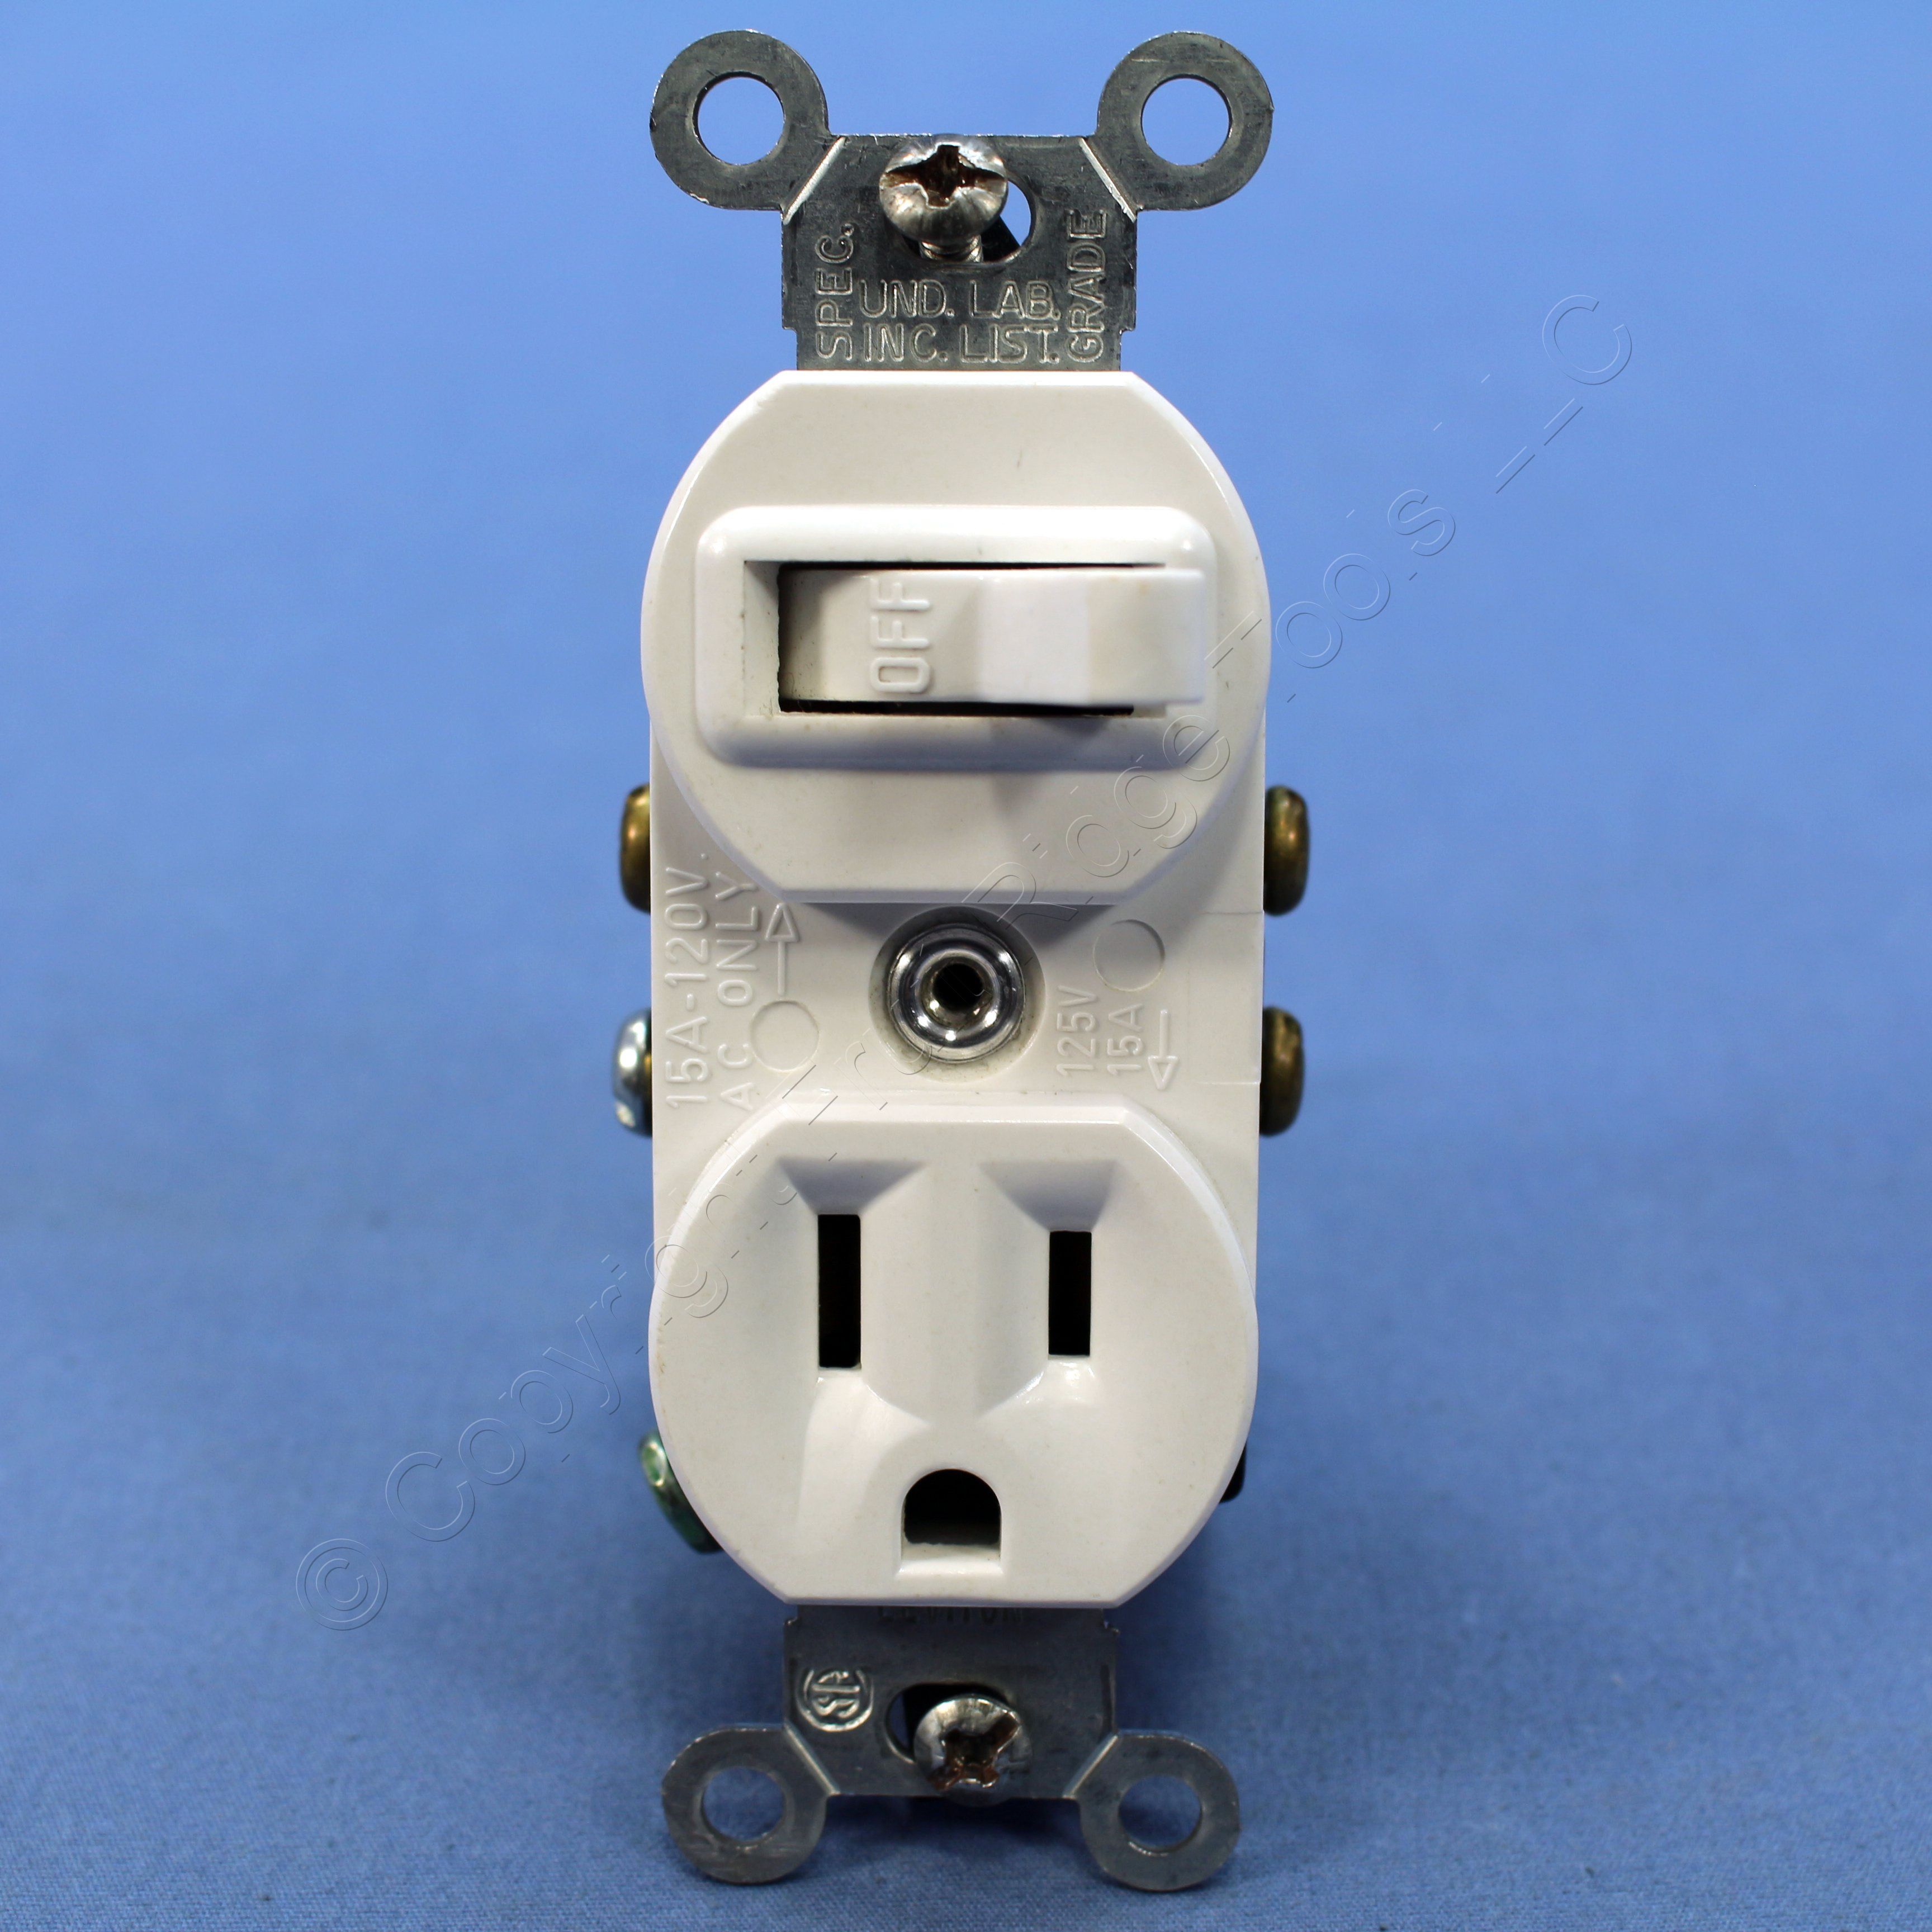 Leviton Combination White Wall Toggle Light Switch Outlet Receptacle 15A 5225-W | eBay